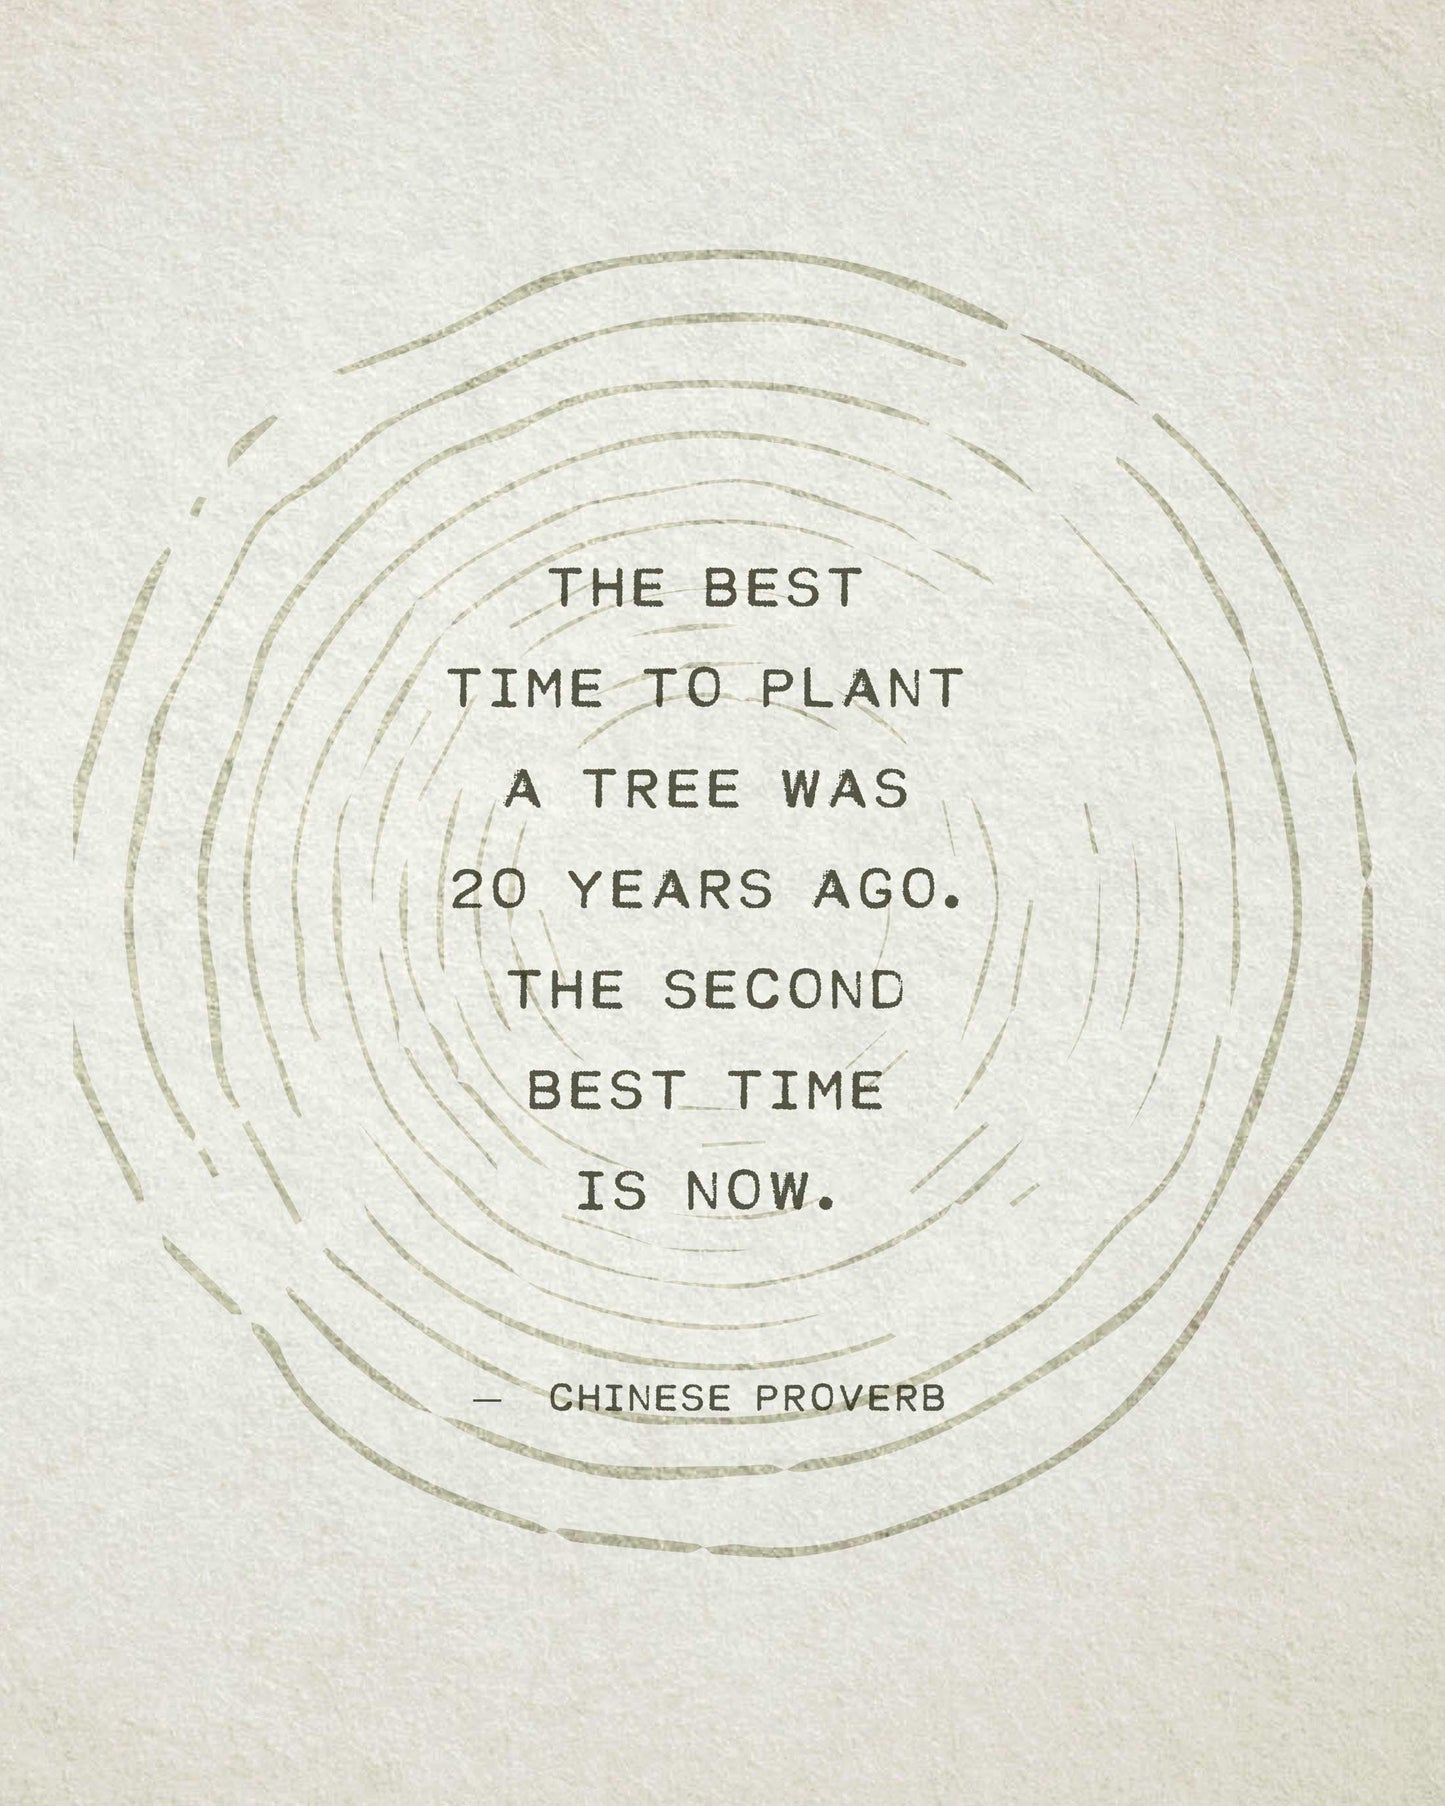 Chinese proverb "the best time to plant a tree was 20 years ago, the second best time is now"